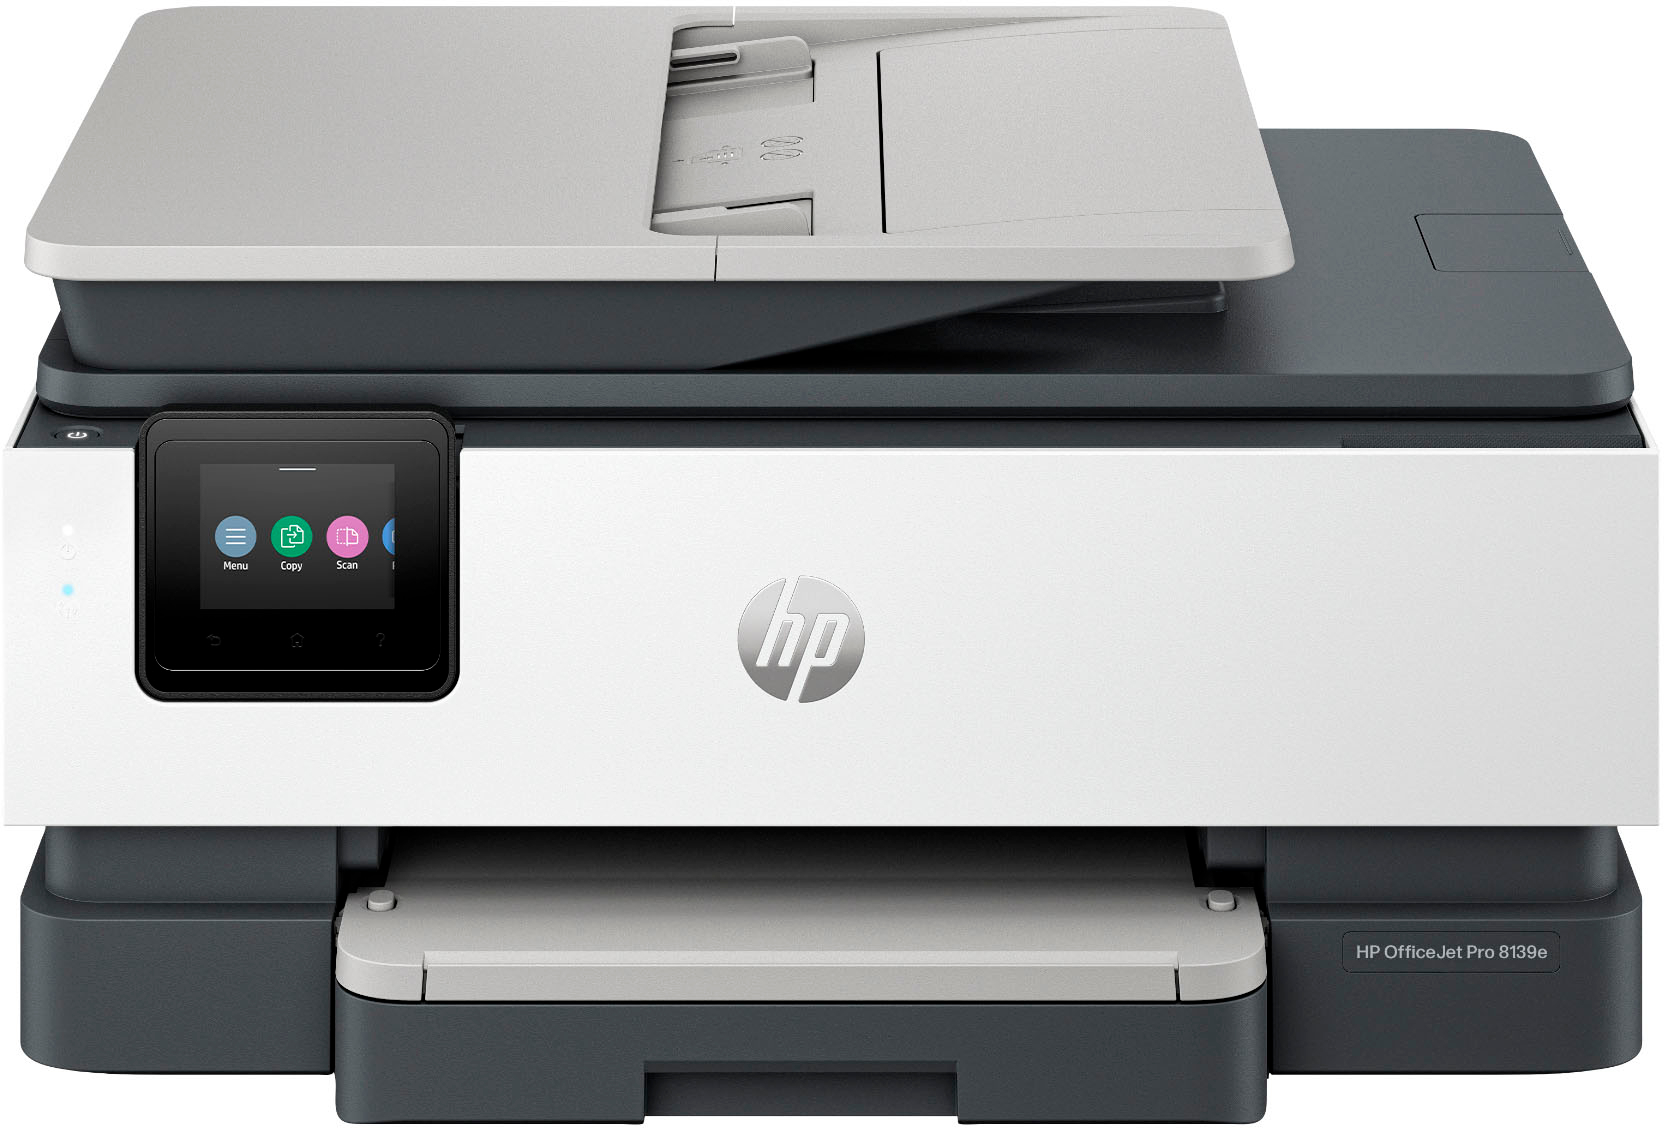 HP OfficeJet Pro 9010 All-in-One Printer series Setup